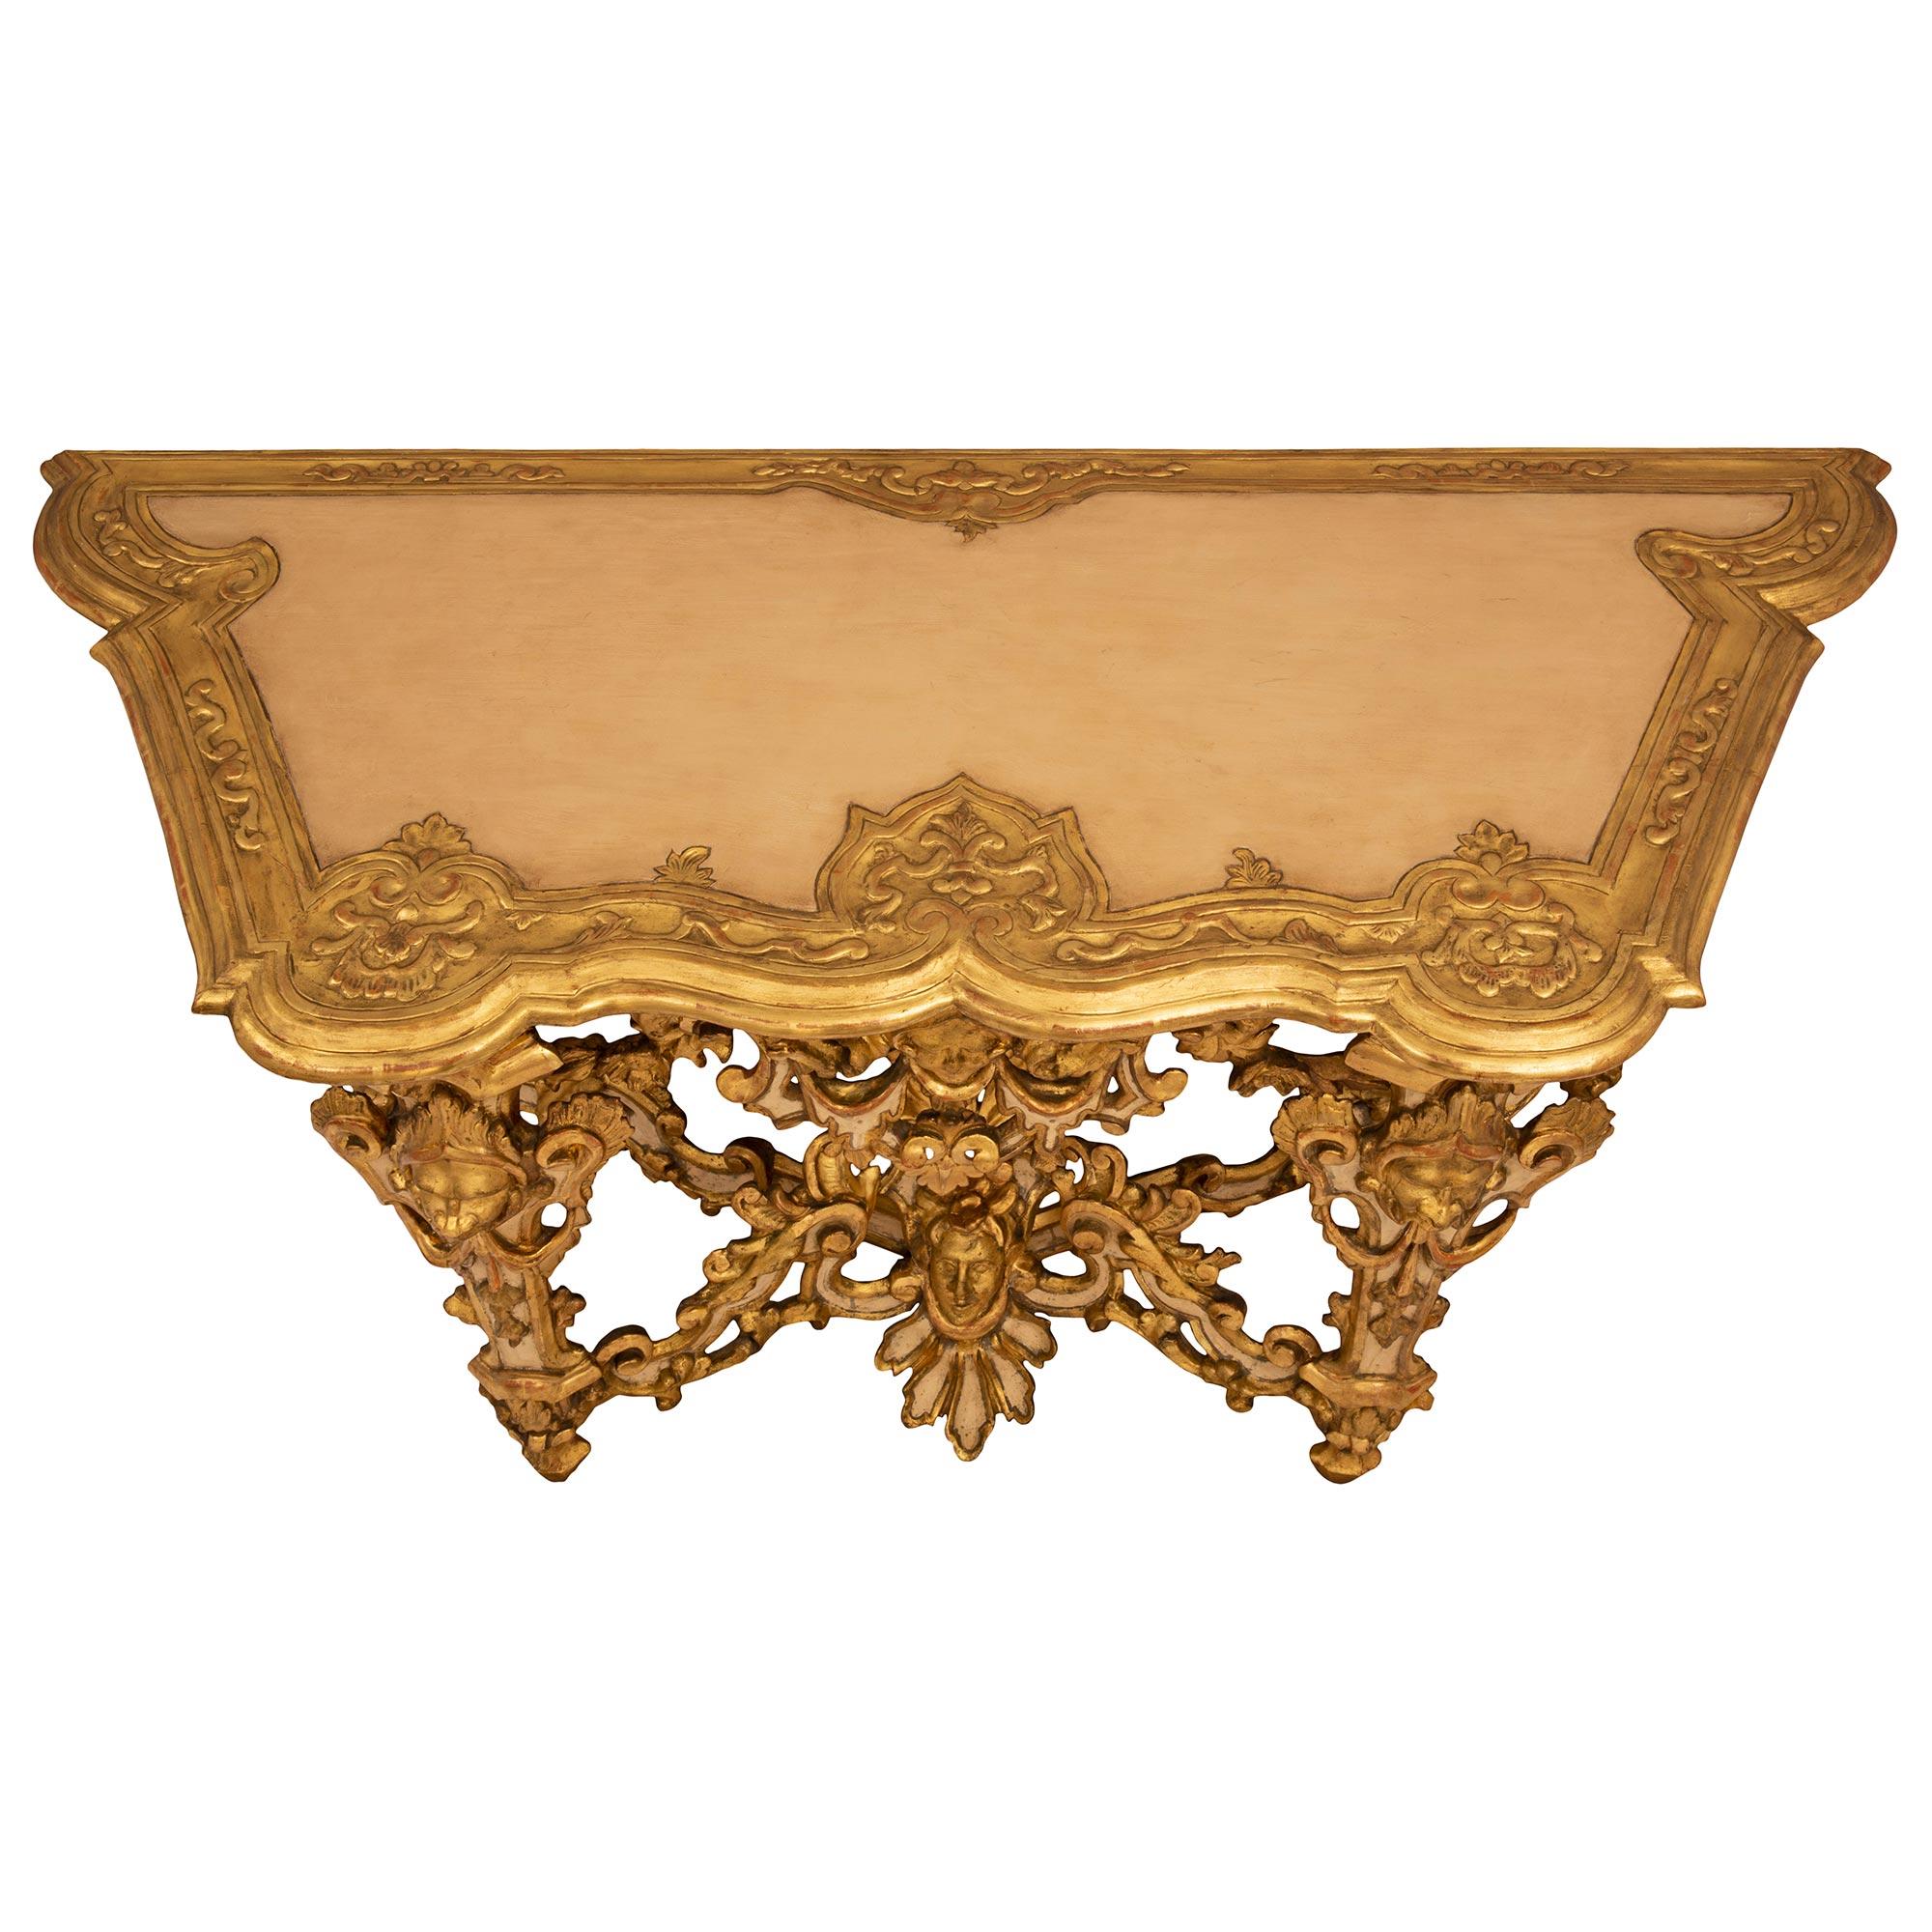 A spectacular Italian 18th century Louis XIV period giltwood and patinated wood Lombardi console. The freestanding console from Lombardi is raised by four most impressive tapered supports with fine topie shaped feet and superb foliate designs with